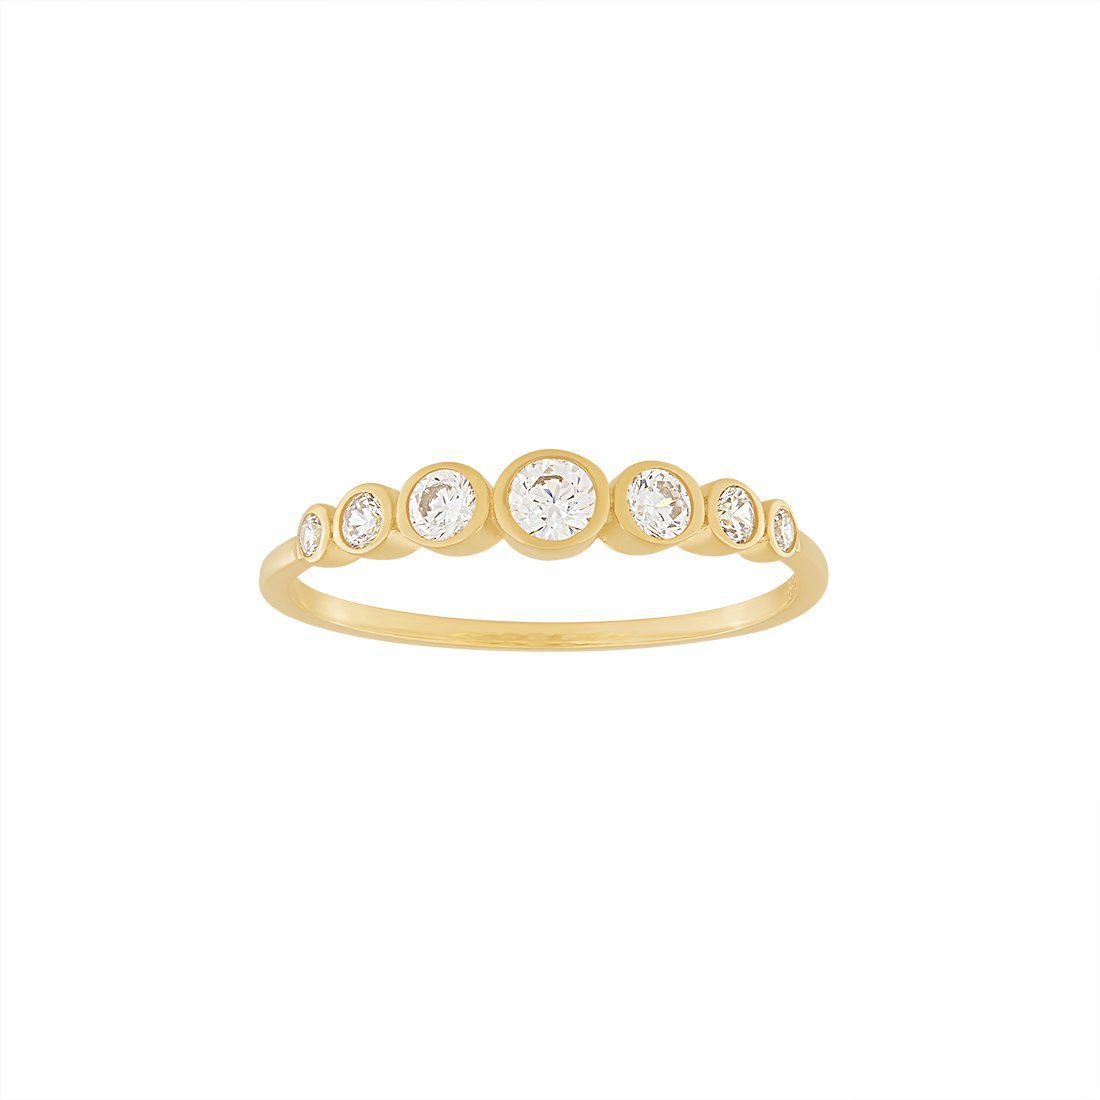 9ct Yellow Gold Channel Set Stackable Ring with Cubic Zirconia Rings Bevilles 